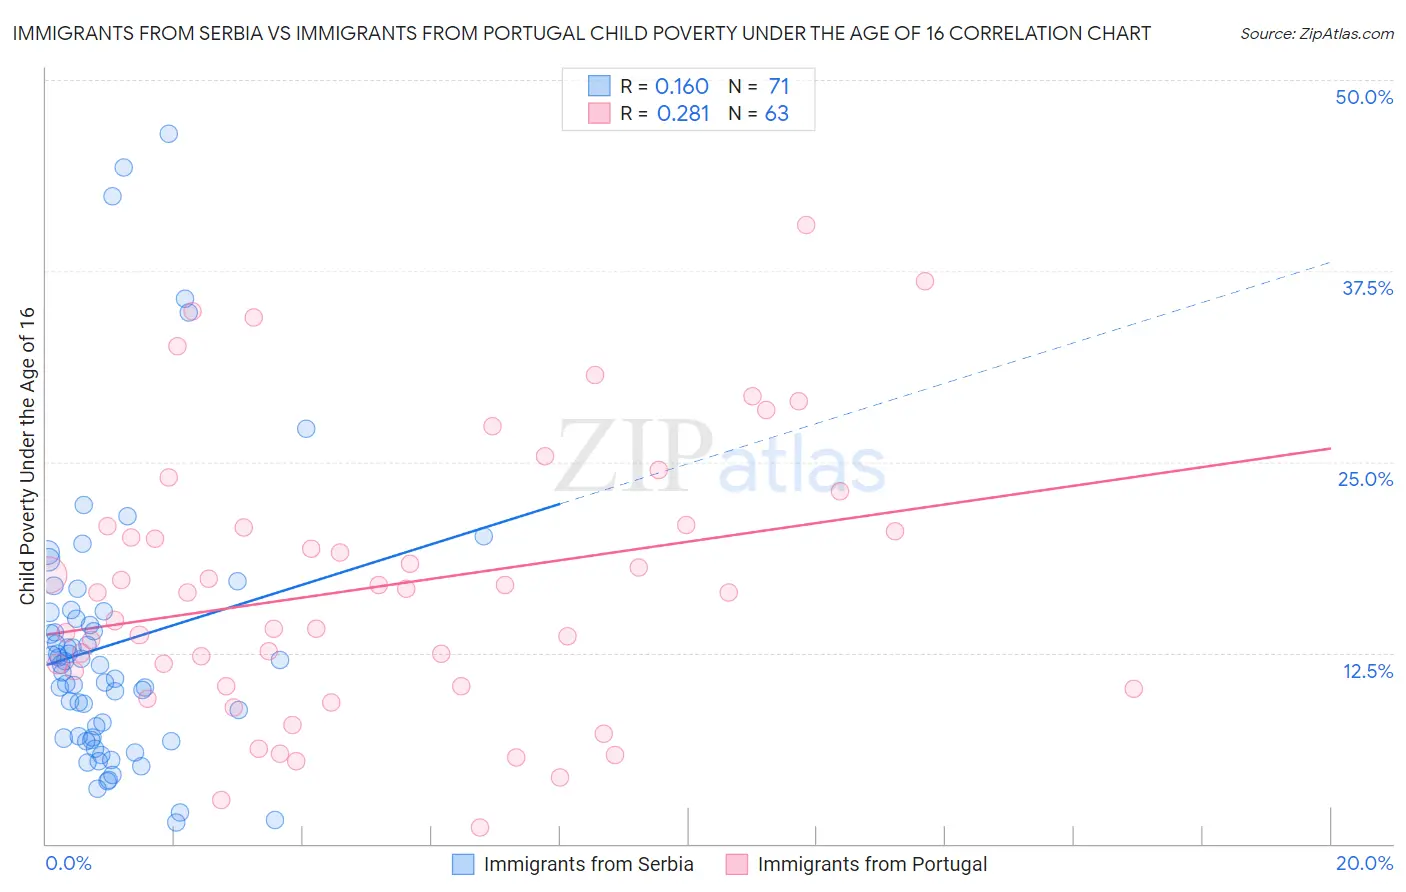 Immigrants from Serbia vs Immigrants from Portugal Child Poverty Under the Age of 16